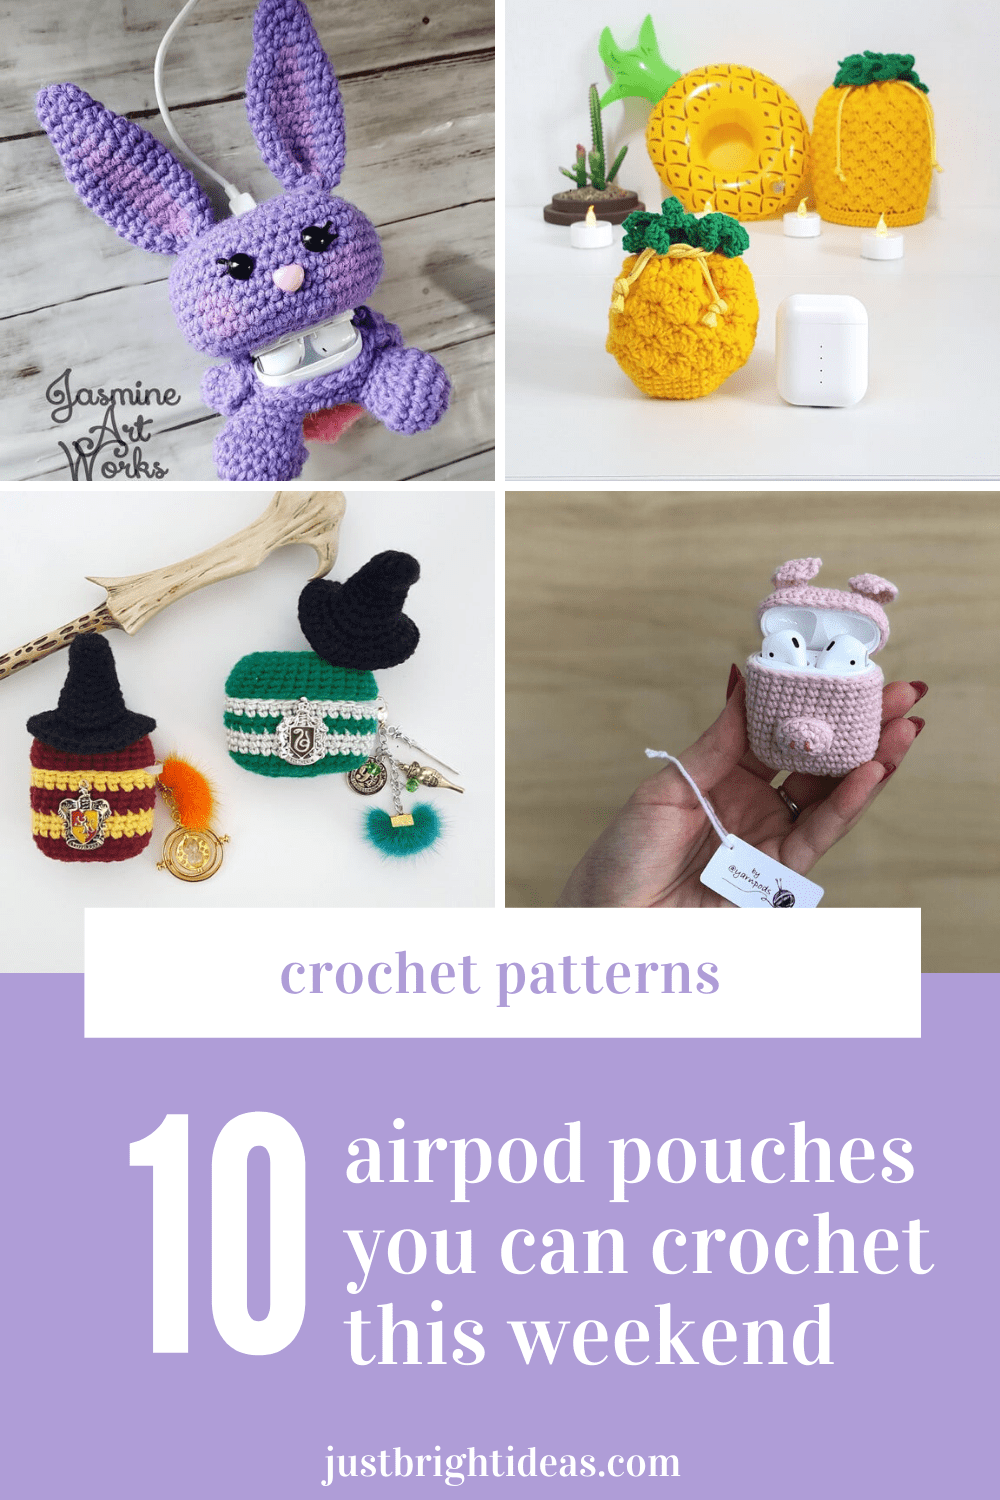 How adorable are these crochet airpod pouches! The perfect gift for someone who needs to keep their pods safe and sound!